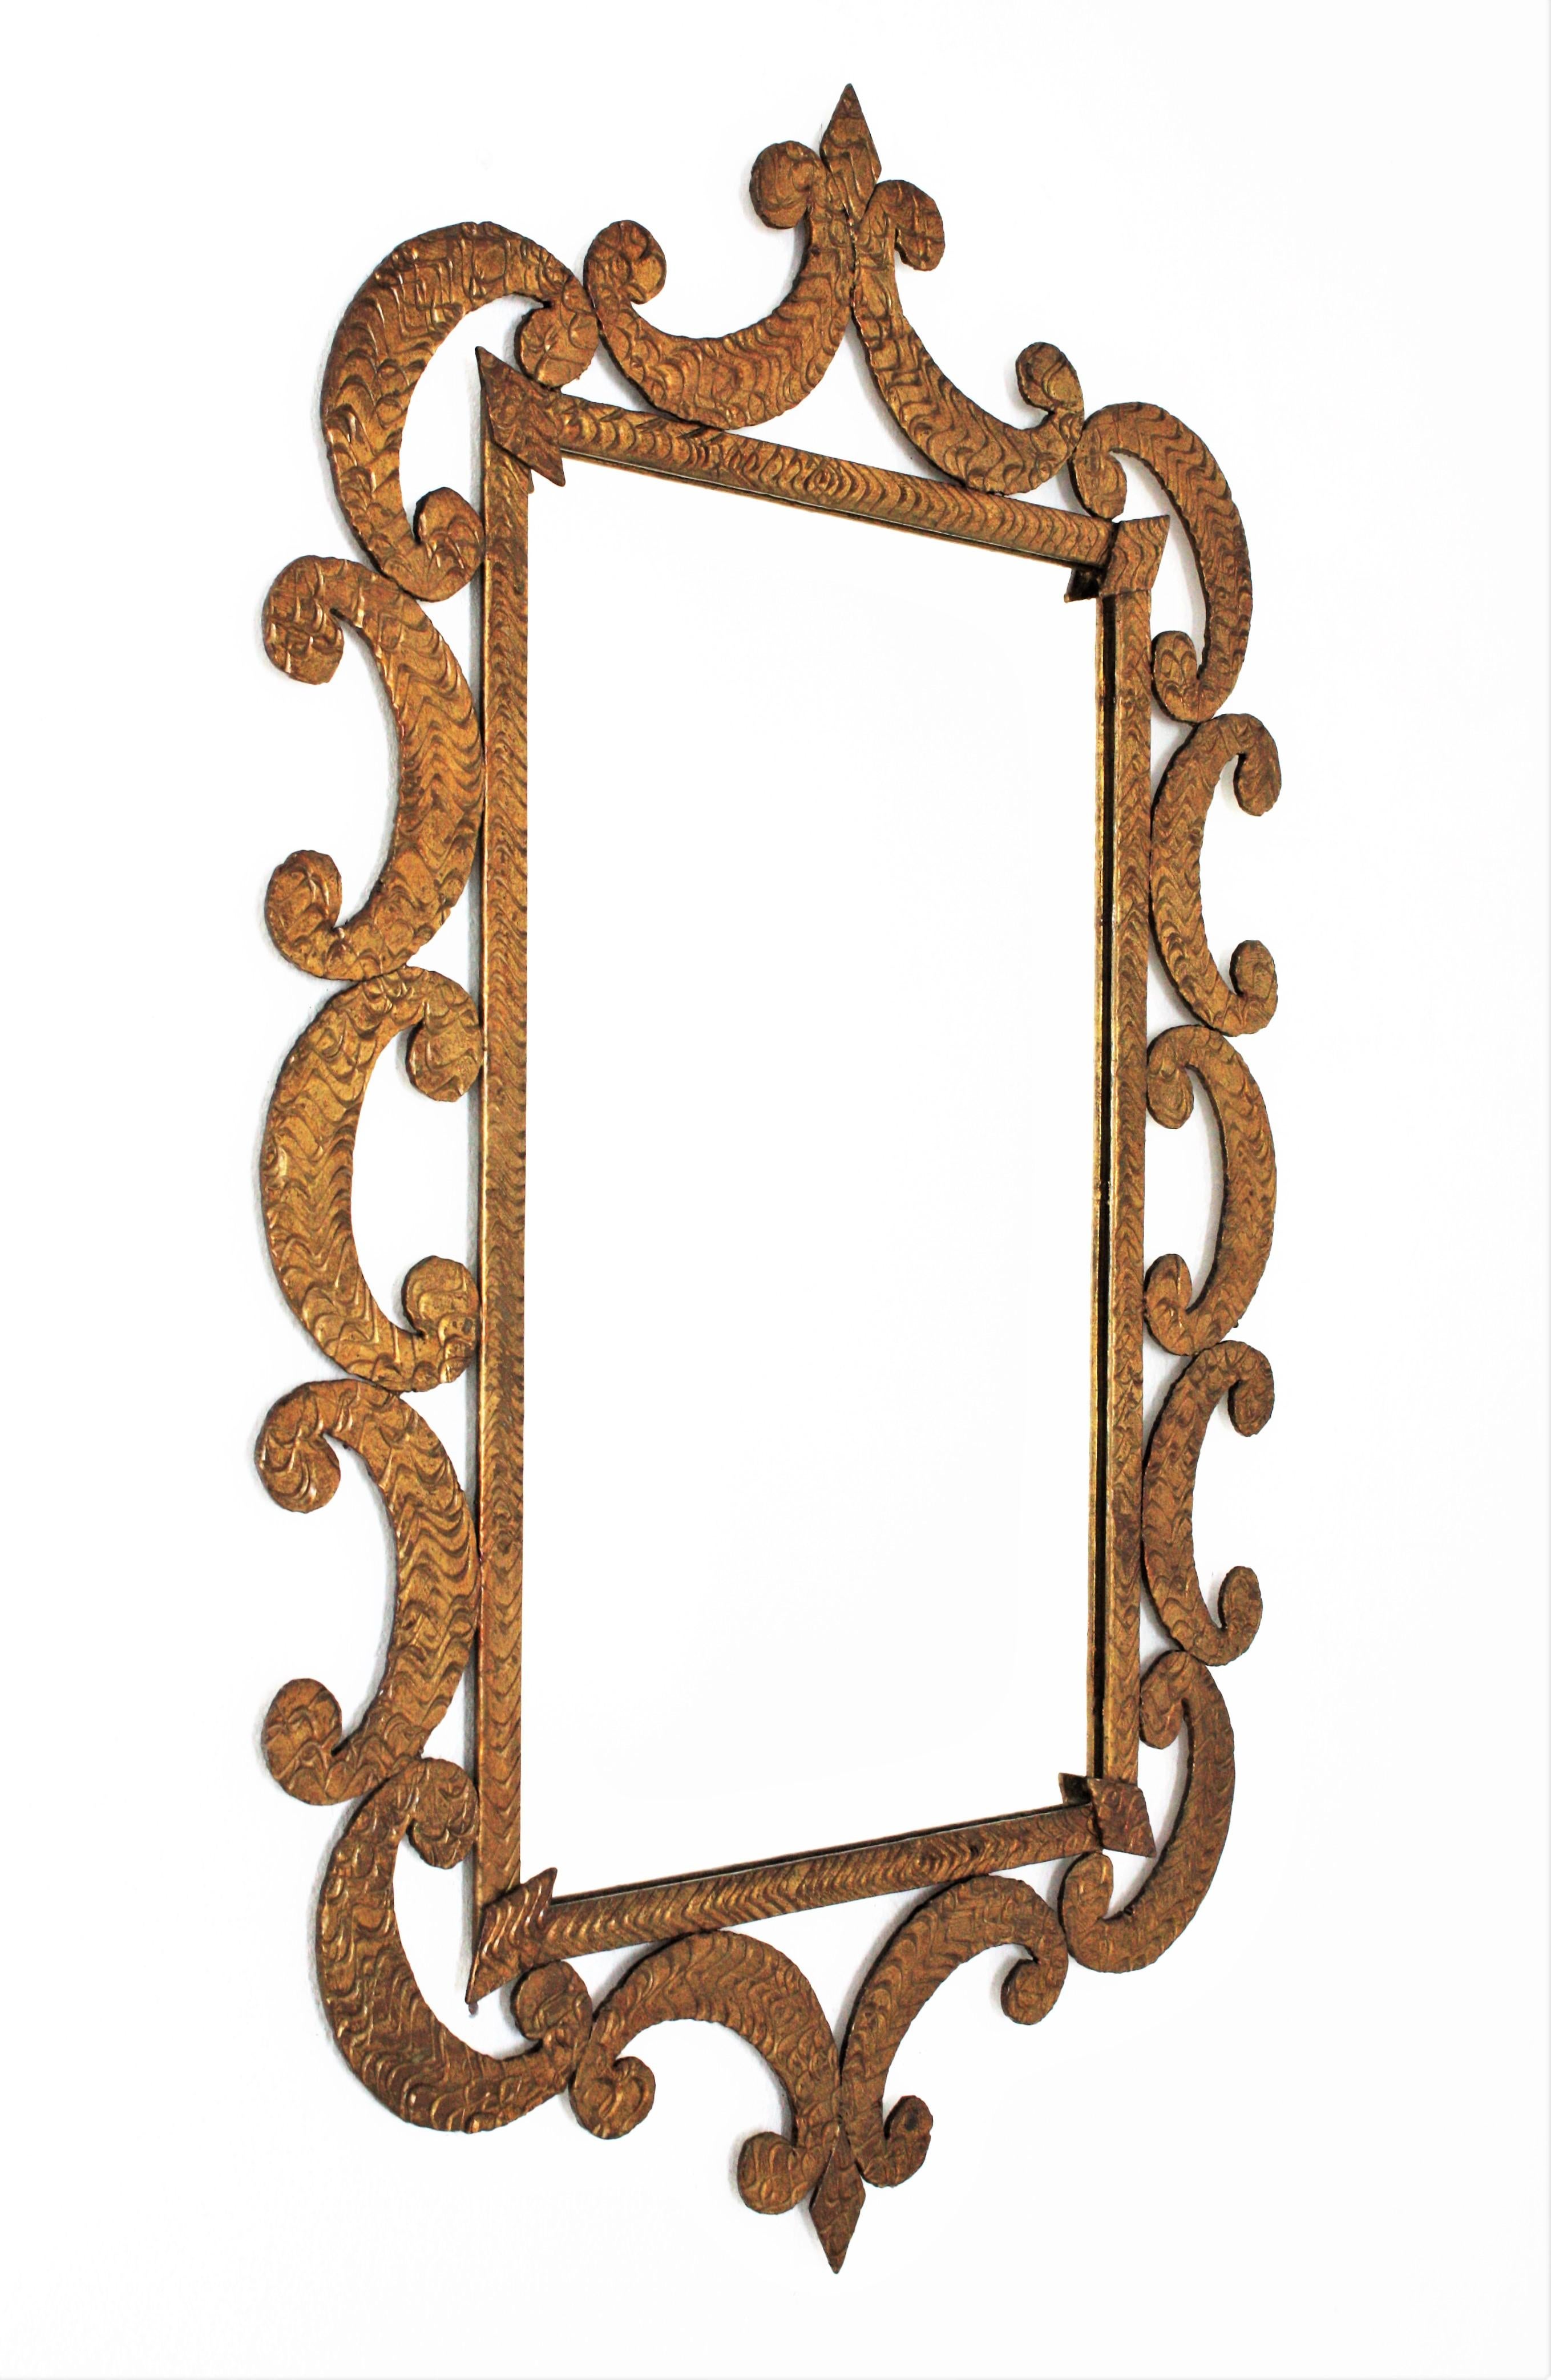 Elegant hand forged gilded iron frame with scroll decorations and rhombus accents at the corners. France, 1930s
This gorgeous mirror has reminiscences from Raymond Subes and Gilbert Poillerat designs.
It has an aged original patina finished in